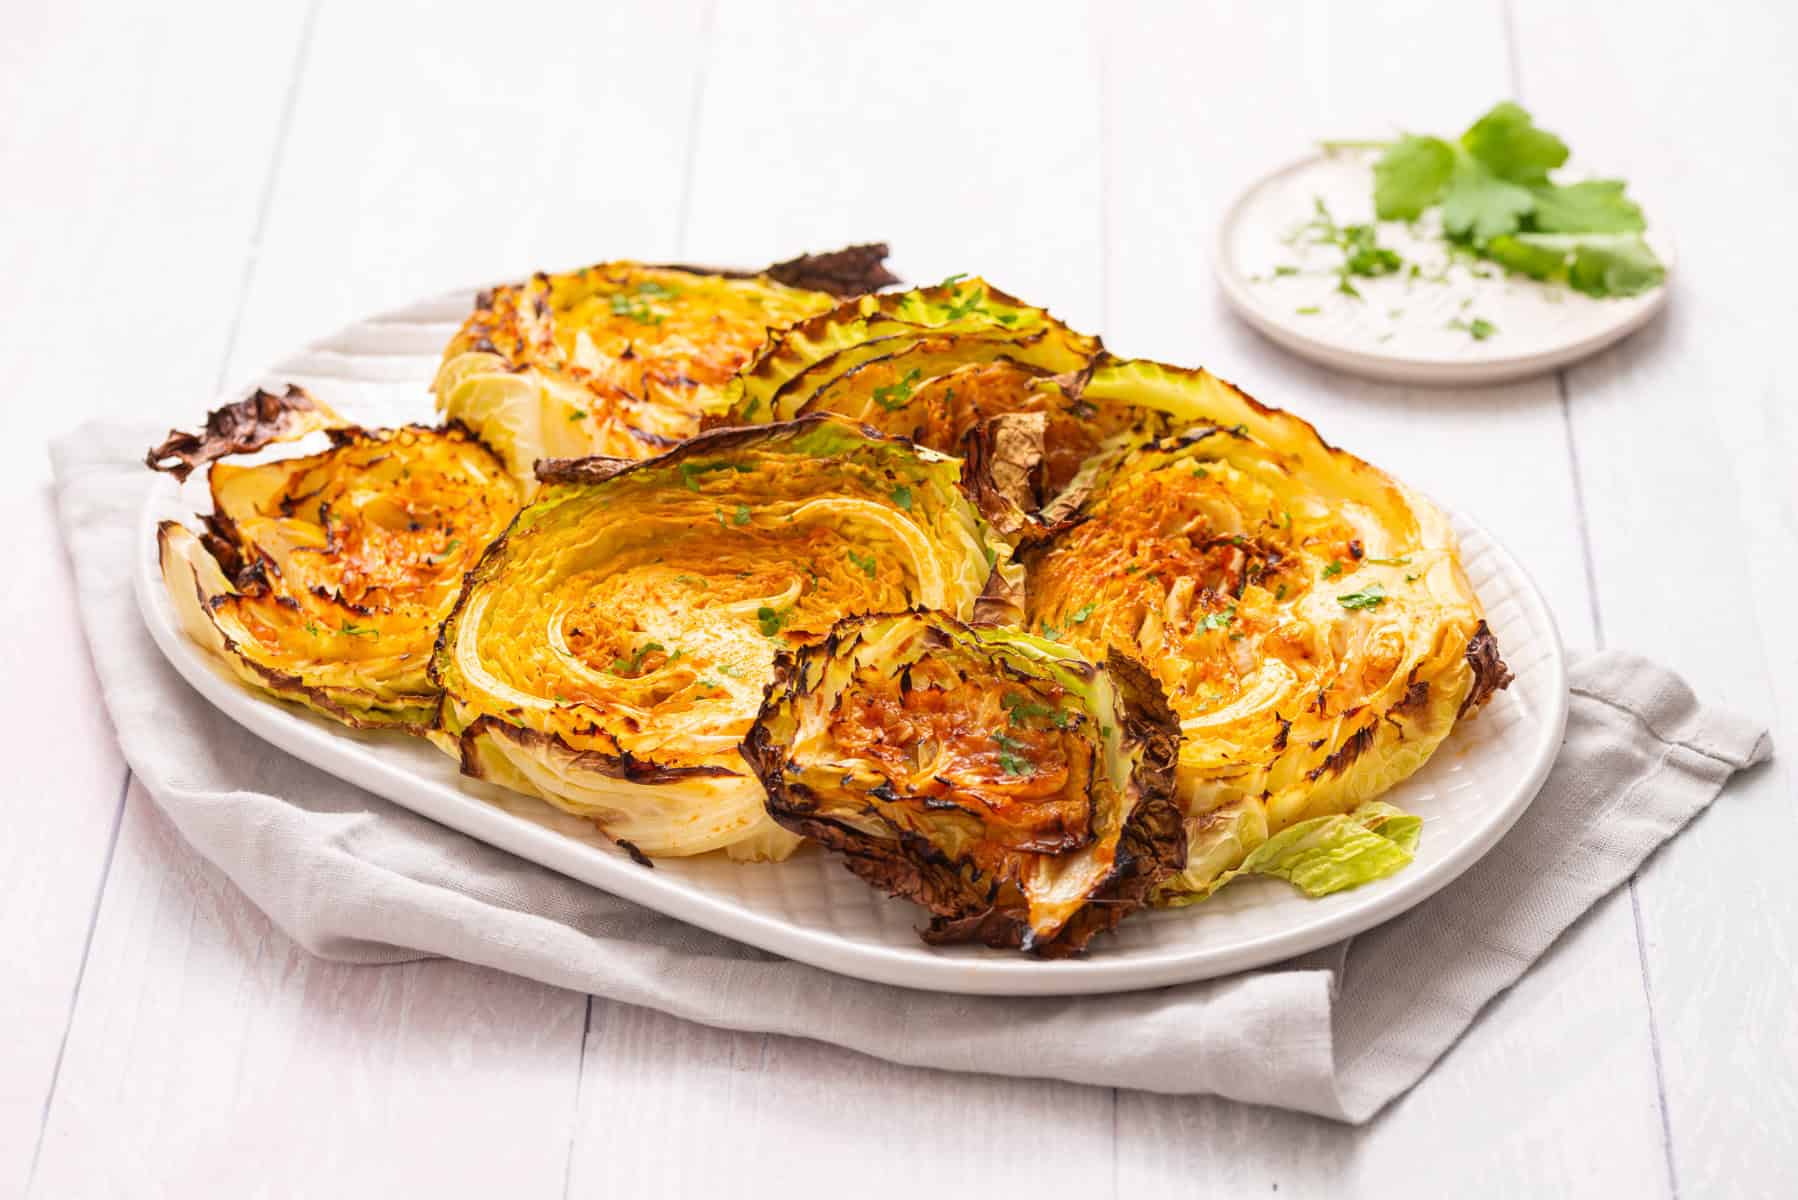 An image of roasted cabbage steaks on a serving plate.